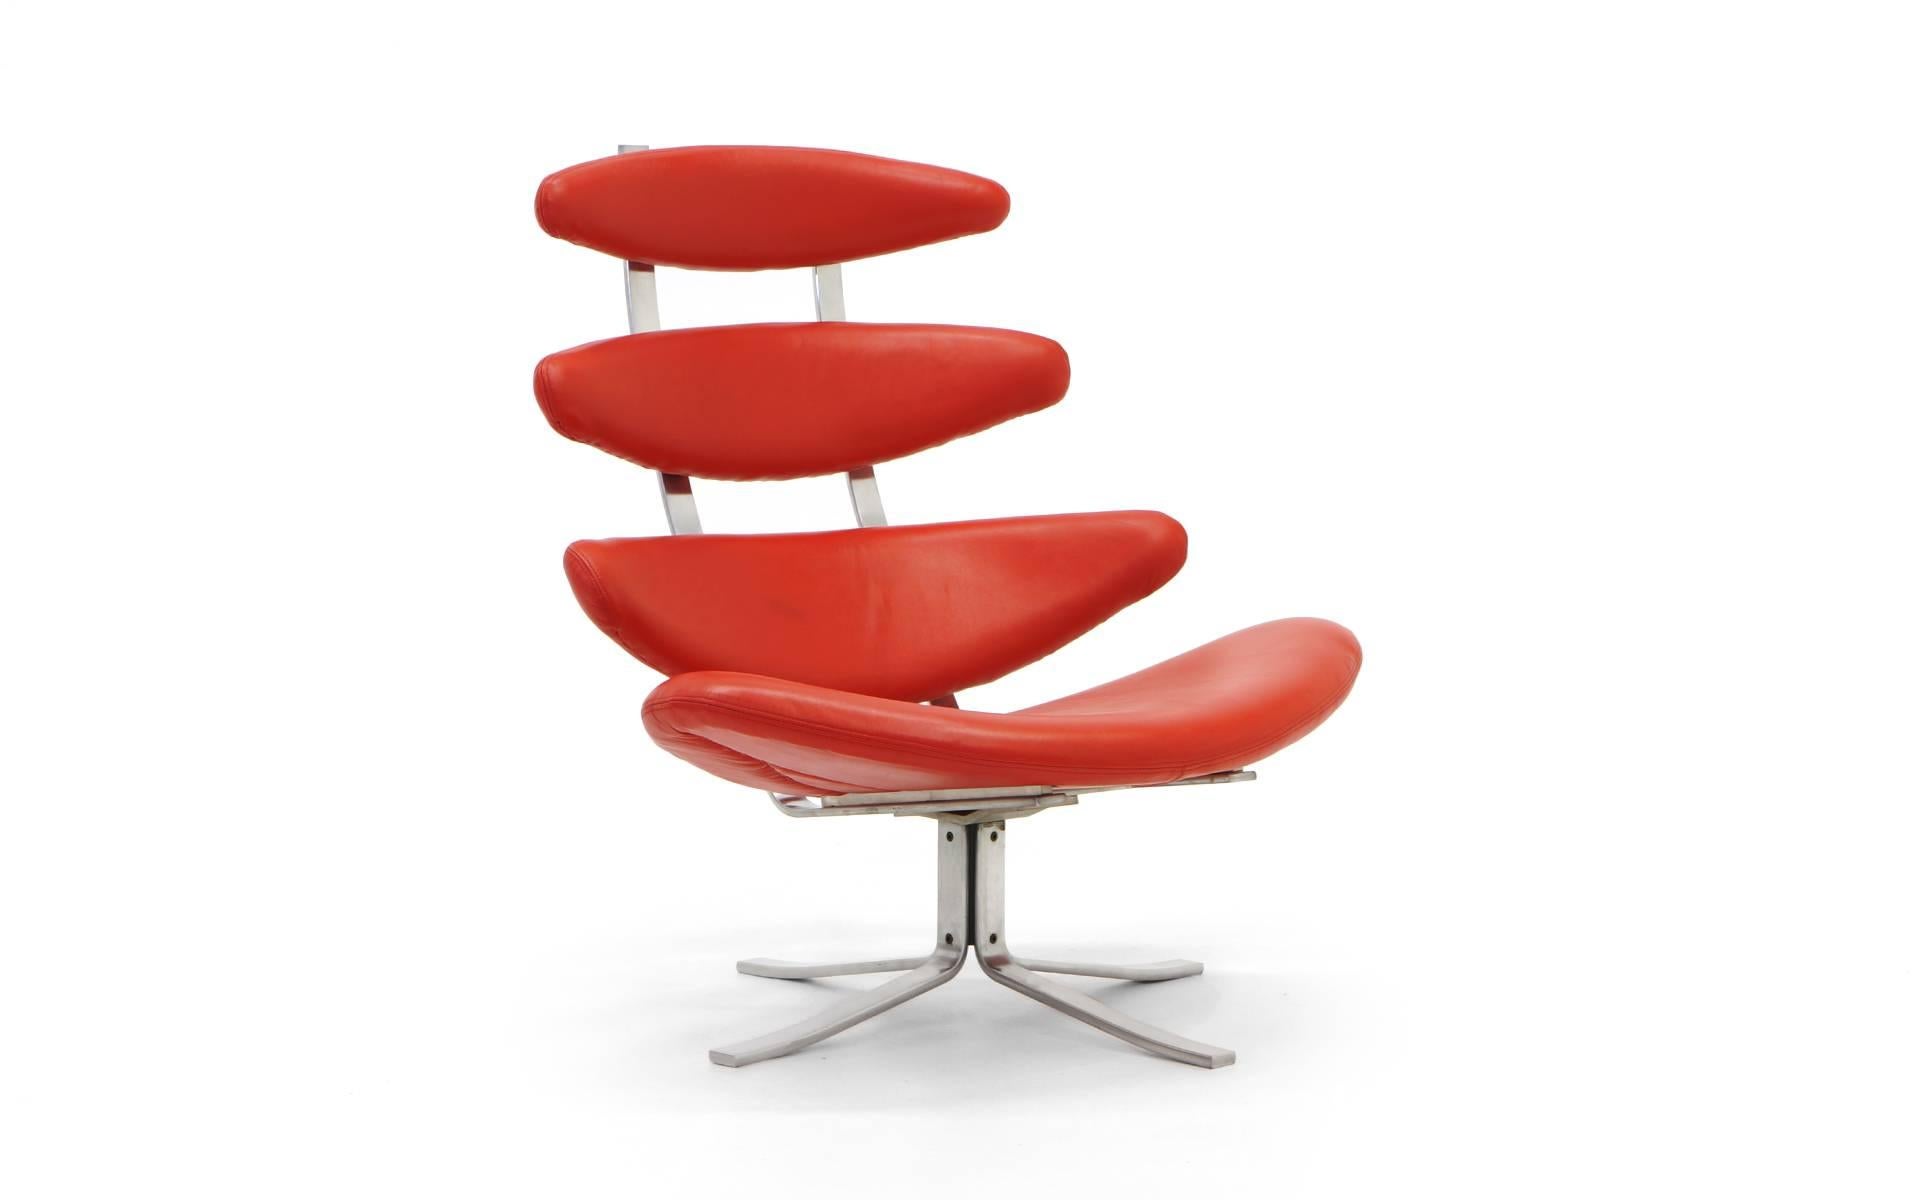 Original early Ej5 Corona chair designed by Poul Volther for Erik Jorgensen. Restored and reupholstered in red Edelman kid calf leather. Full 360 degree swivel.